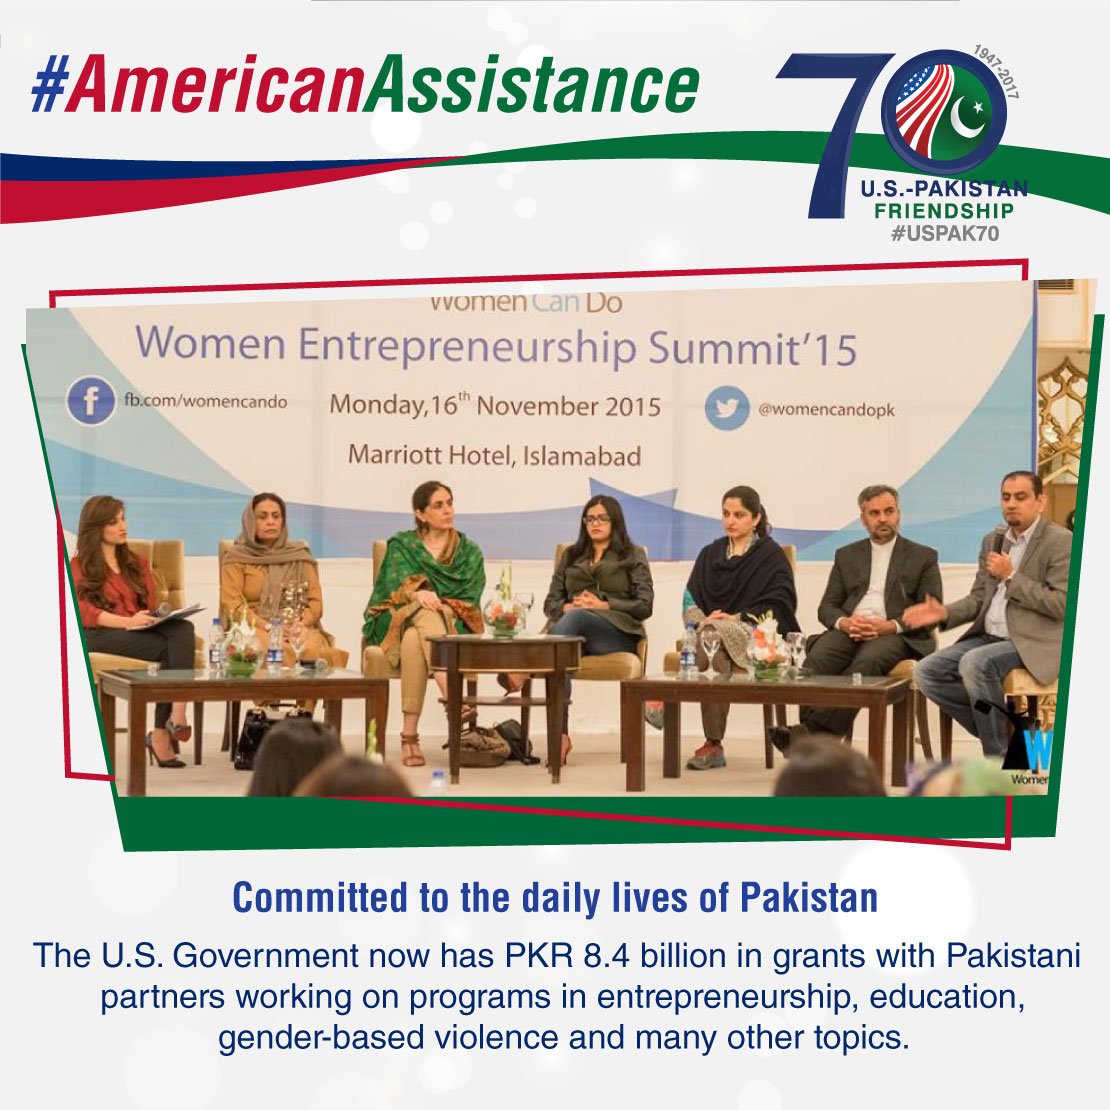 #AmericanAssistance The U.S. Government now has PKR 8.4 billion in grants with Pakistani partners on programs in entrepreneurship, education, gender-based violence and many other topics. #USPAK #USPAK70